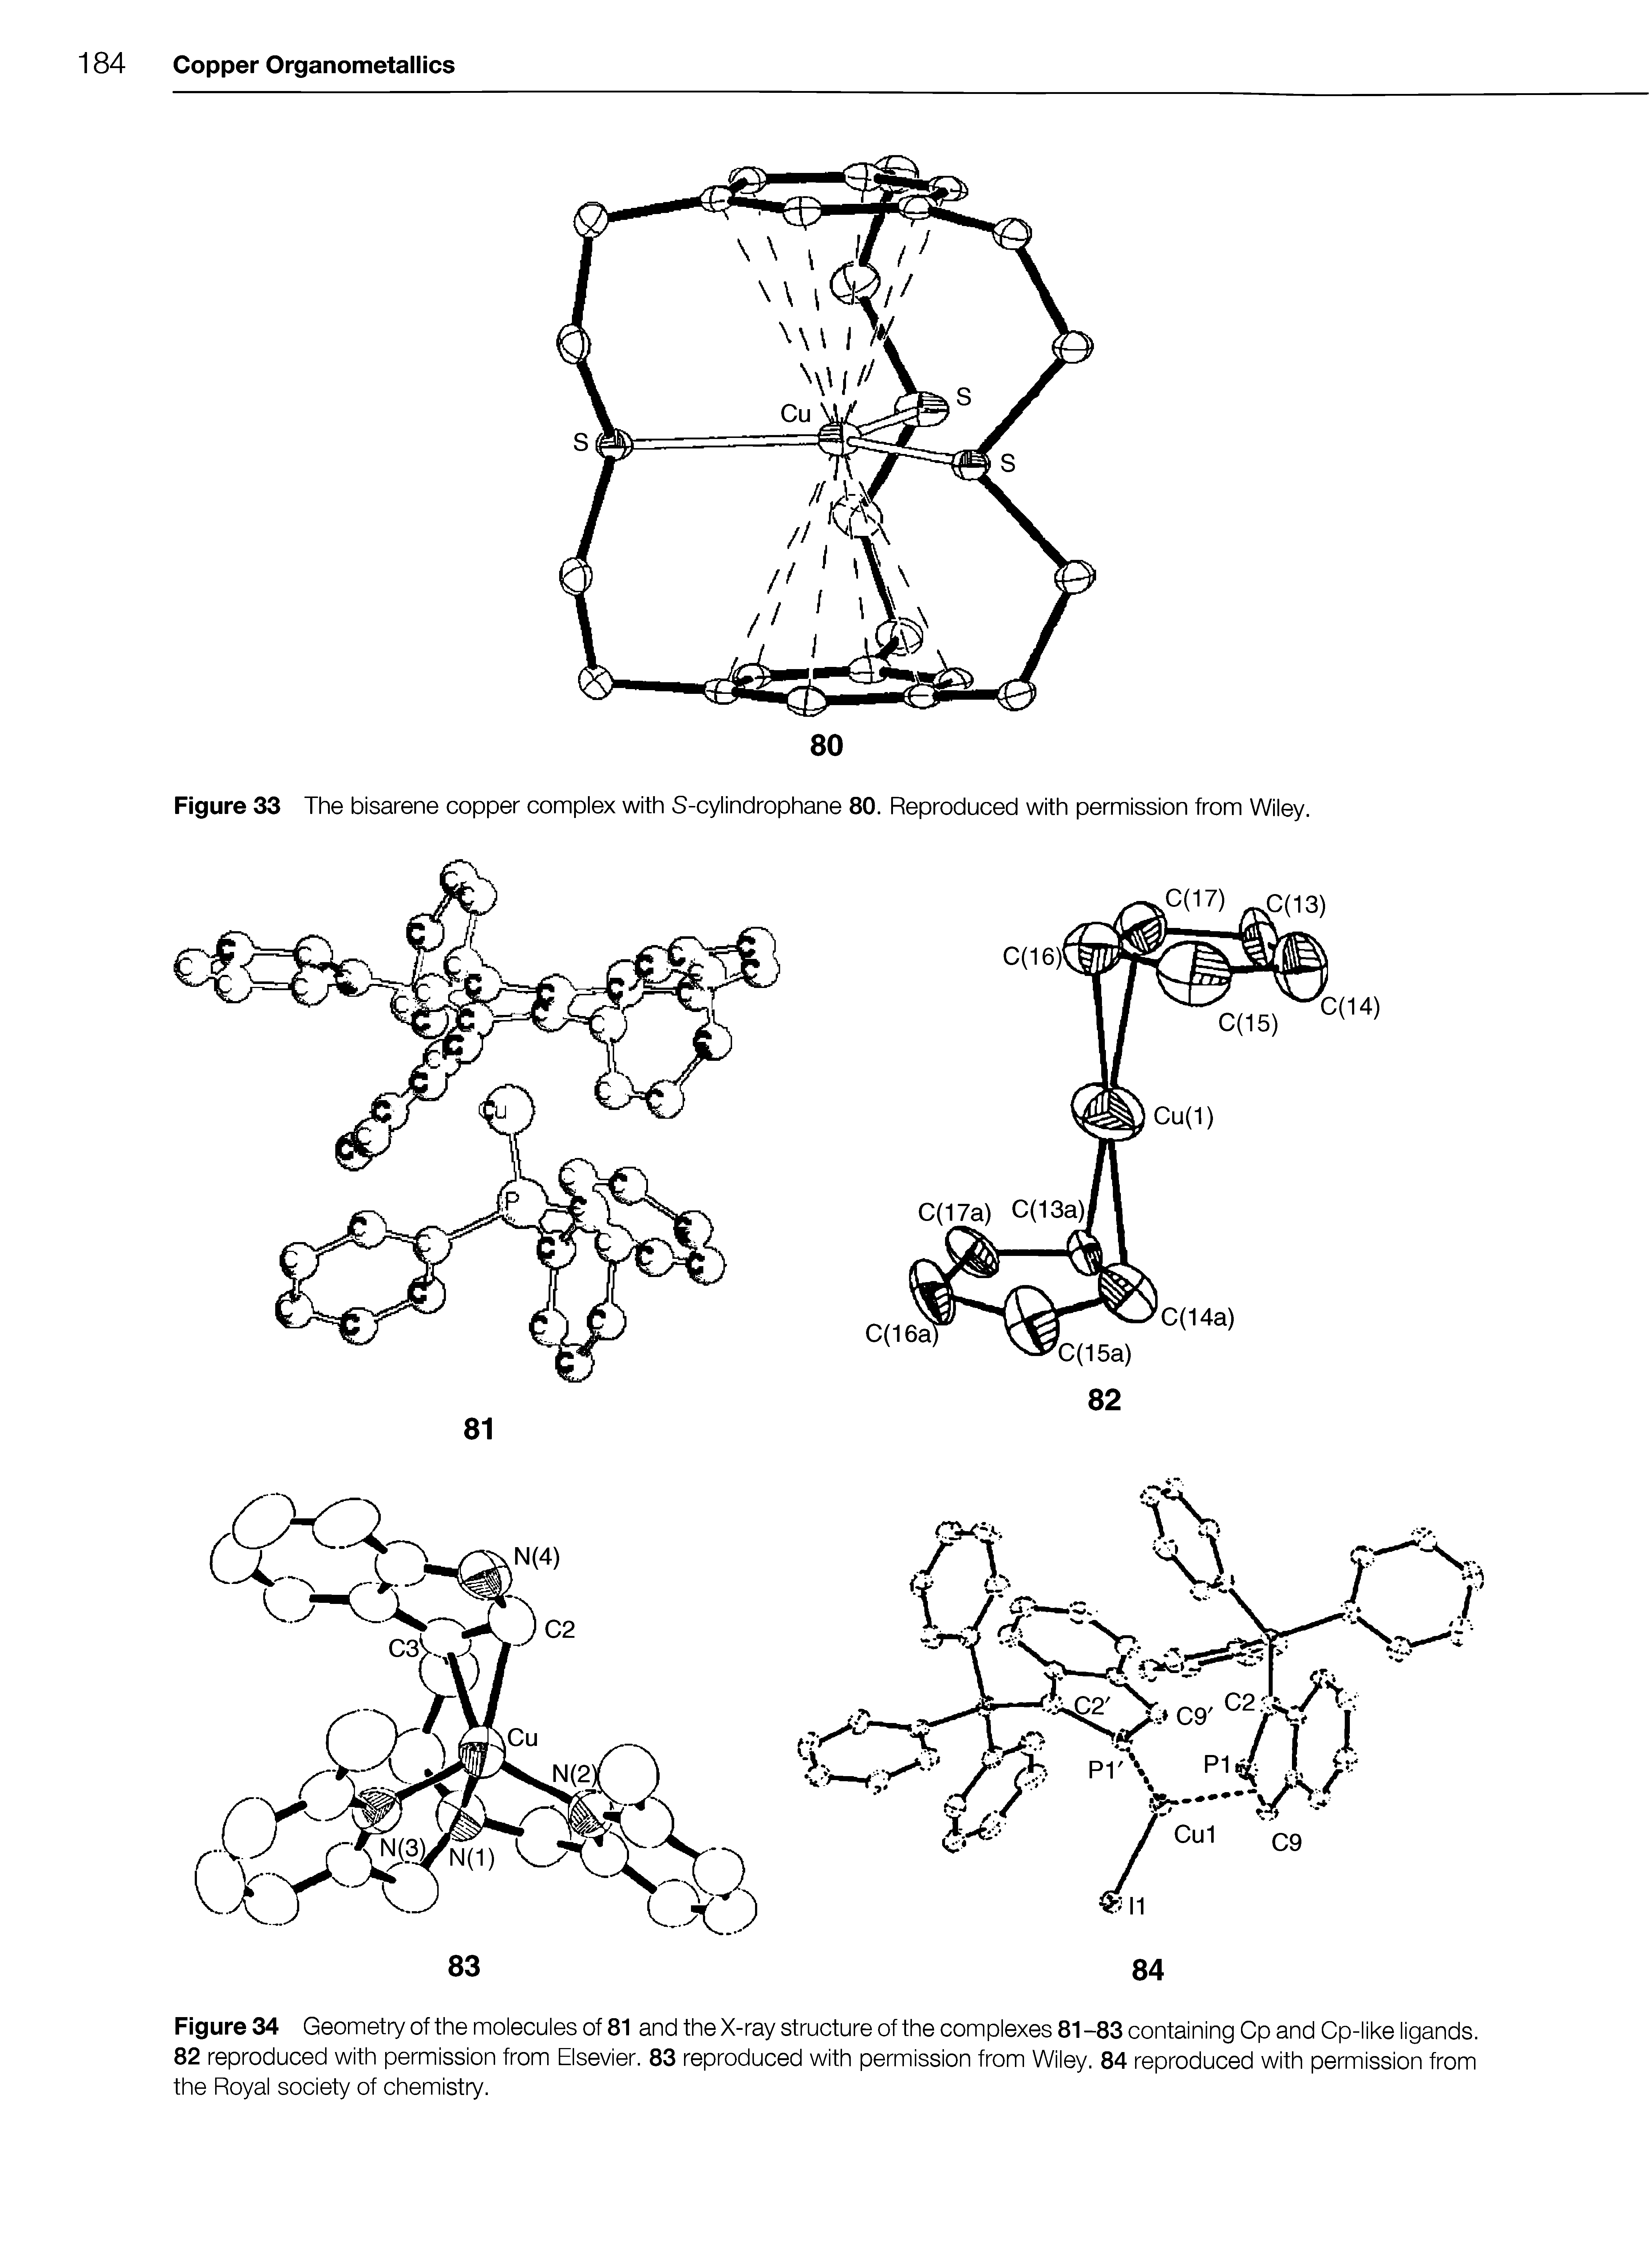 Figure 33 The bisarene copper complex with S-cylindrophane 80. Reproduced with permission from Wiley.